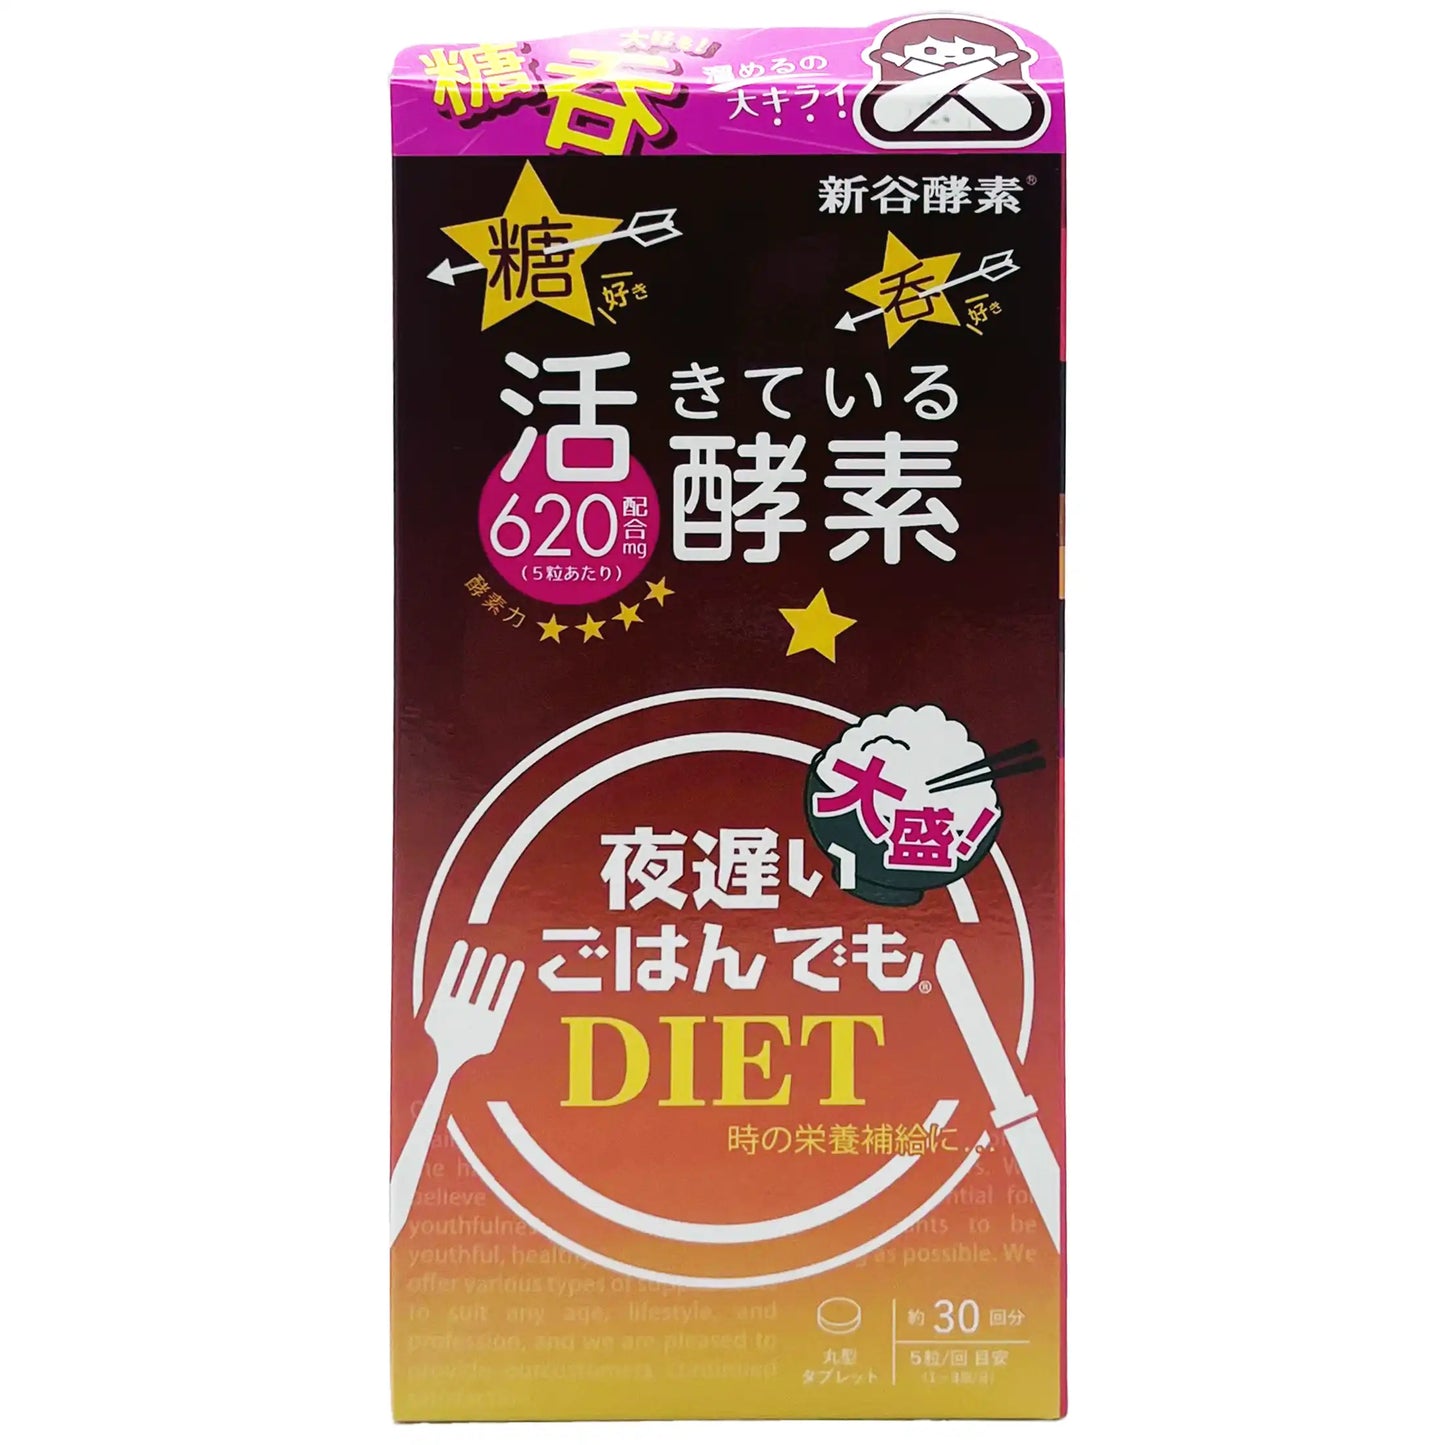 Shinya Koso Late Night Meal Diet Enzymes Plus 30 tablets 1.27 oz